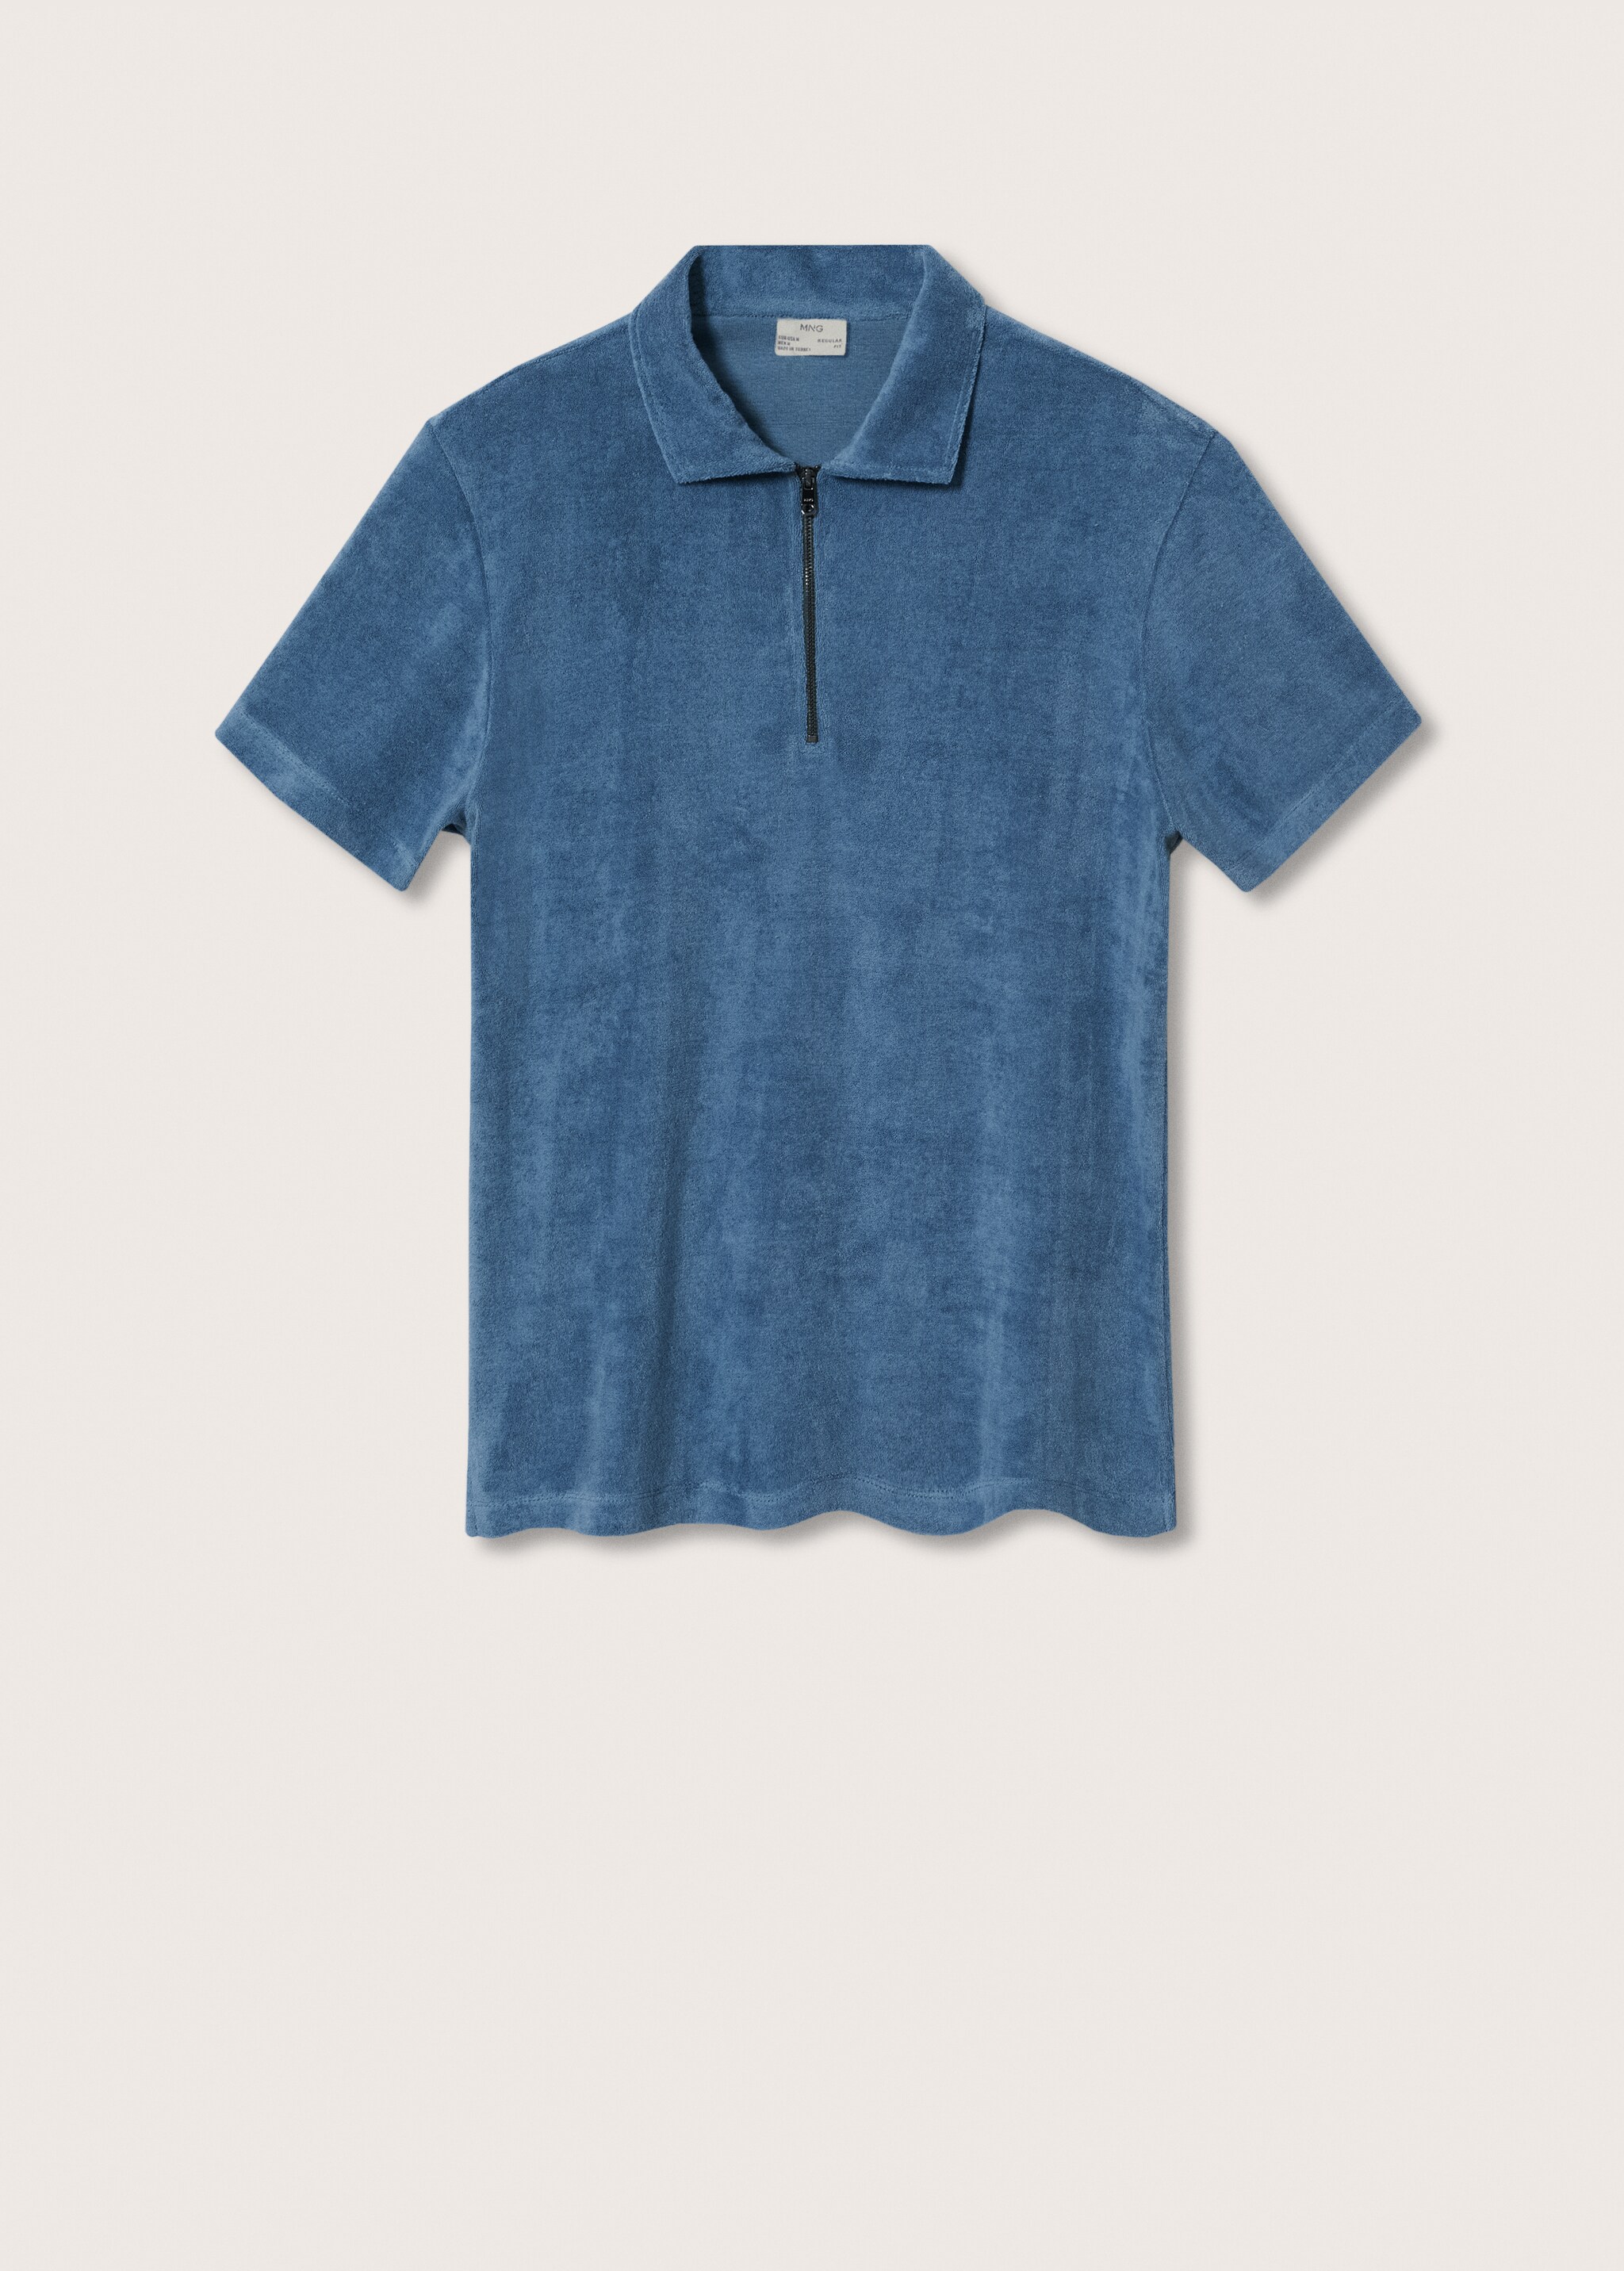 Cotton towel texture polo shirt - Article without model